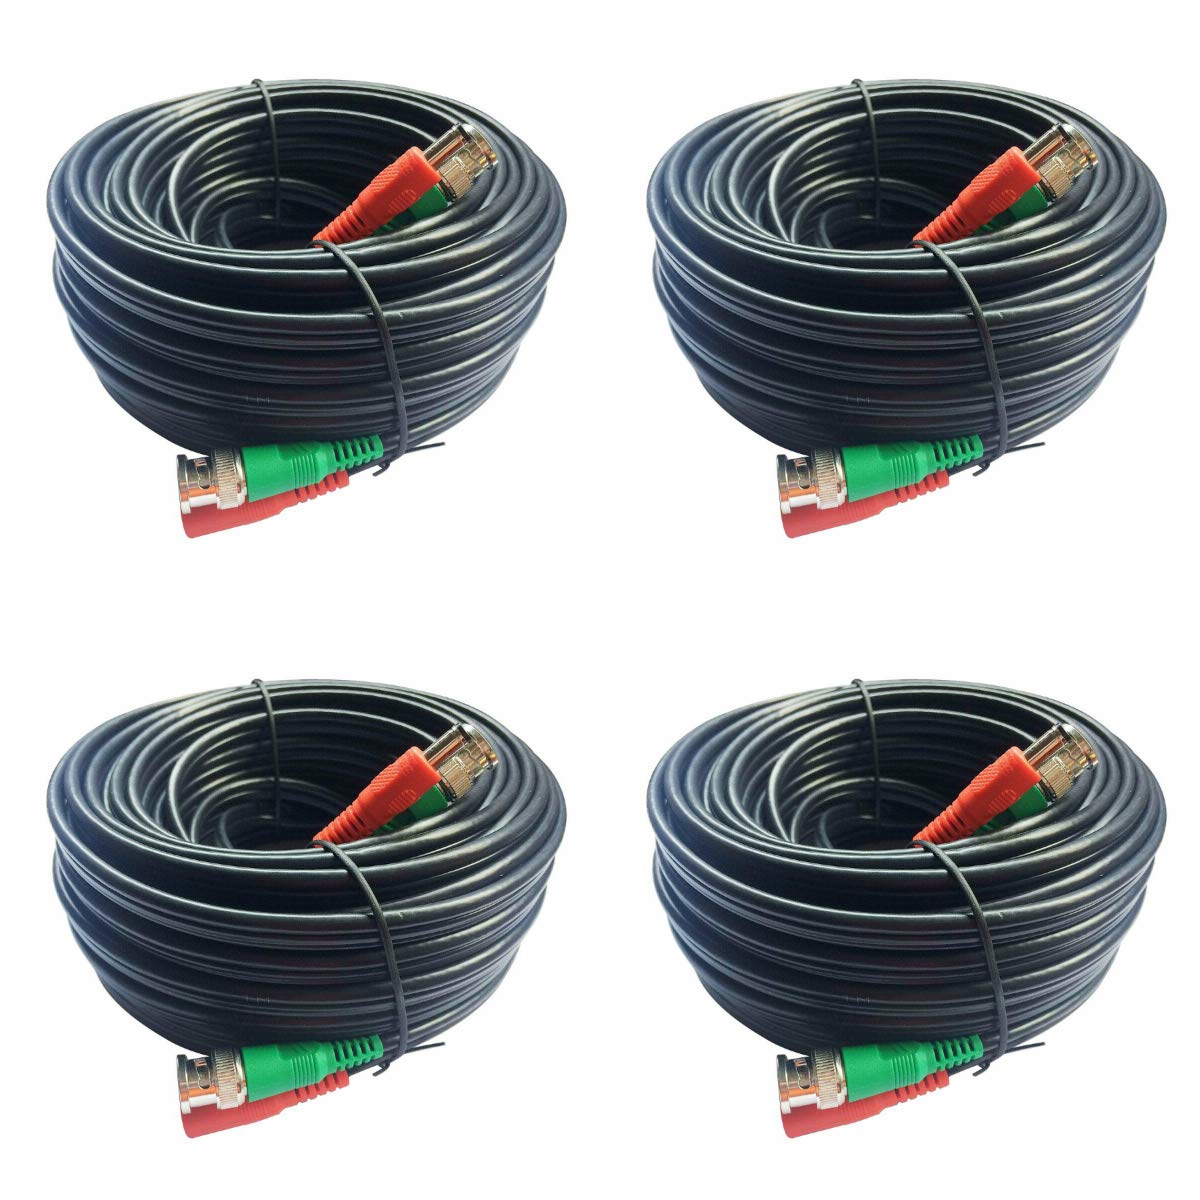 ULTRAPOE 4 pcs of 100 ft for Security Camera System CCTV Video Power Cable BNC RCA Cord Wire - image 1 of 1